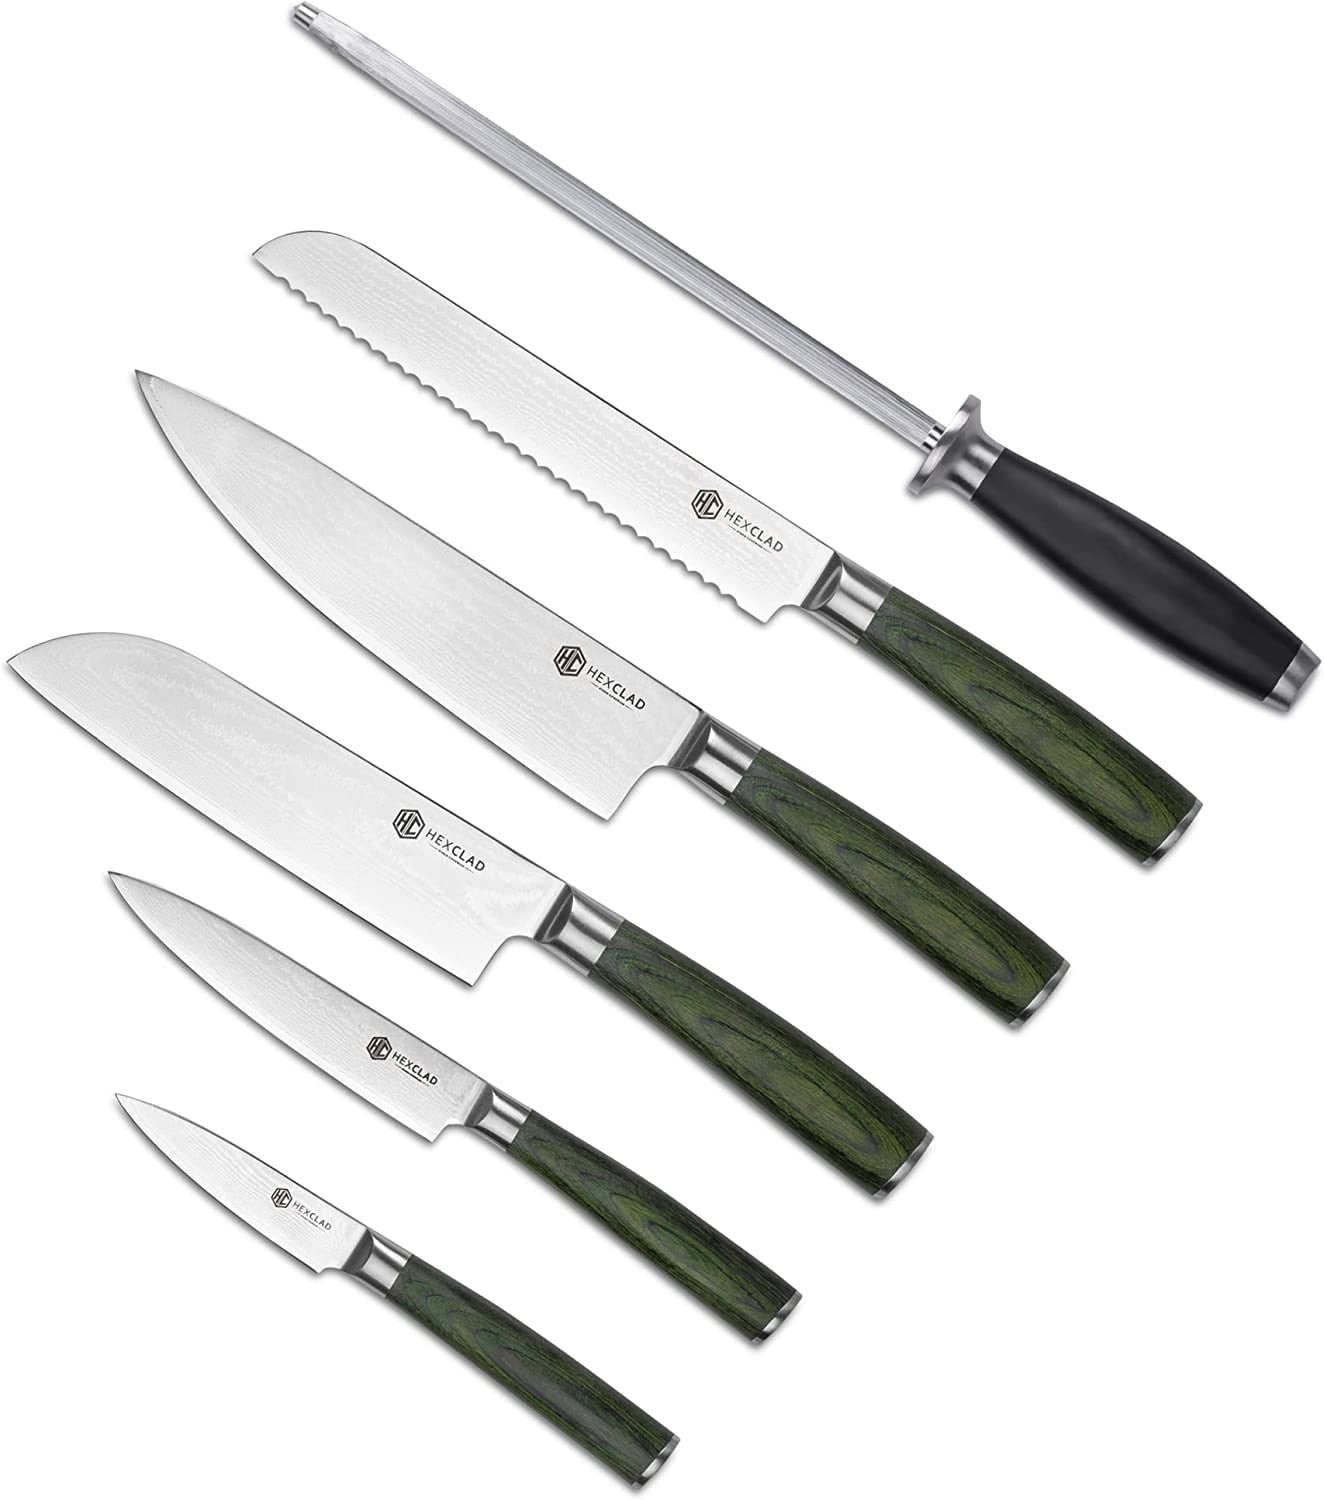  HexClad Steak Knife Set, 4-Pieces Damascus Stainless Steel  Blades, Full Tang Construction, Pakkawood Handles: Home & Kitchen